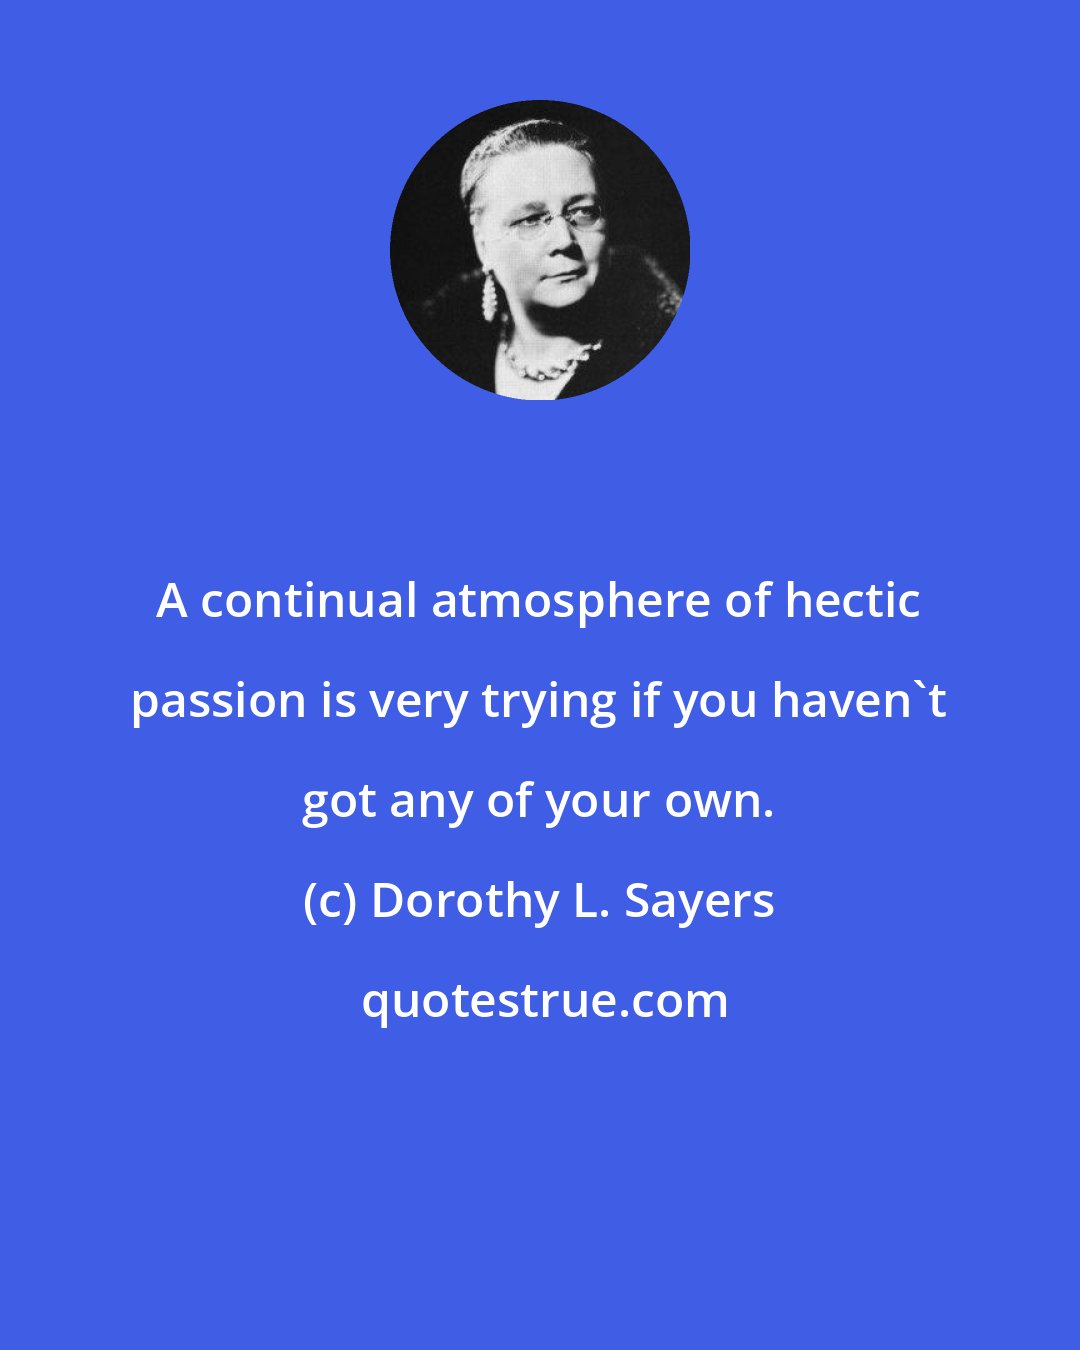 Dorothy L. Sayers: A continual atmosphere of hectic passion is very trying if you haven't got any of your own.